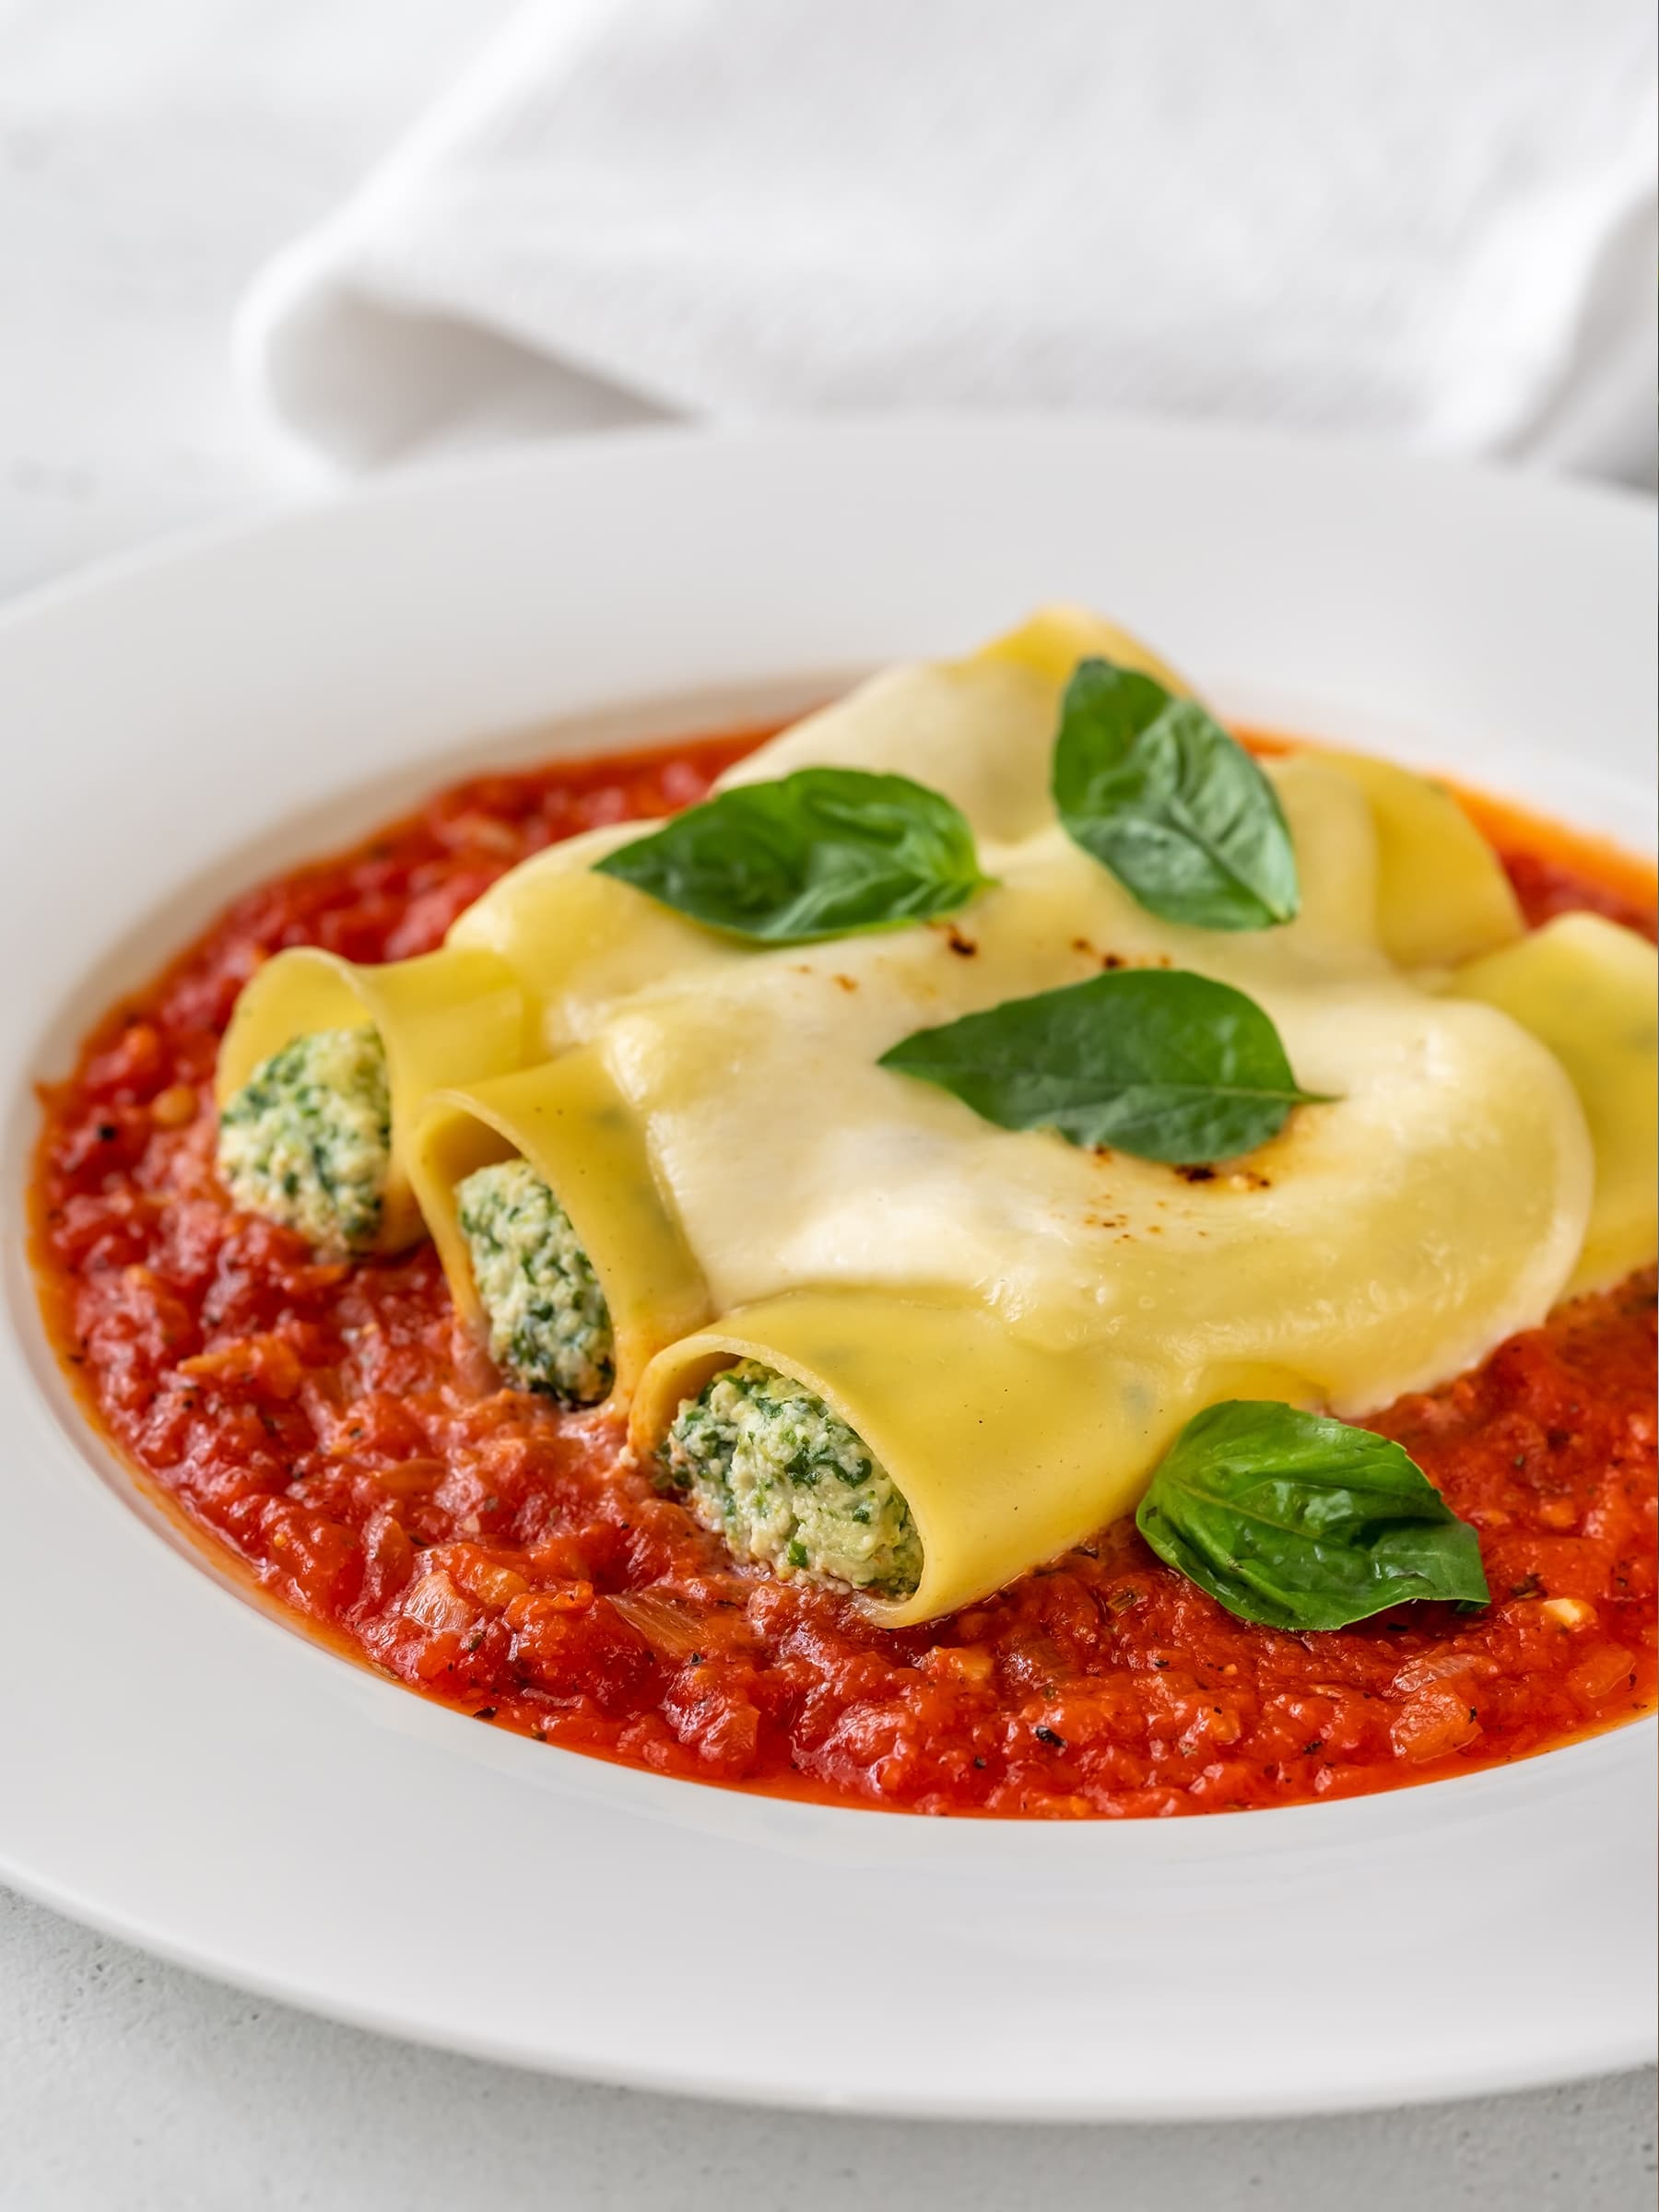 Close up image of three cannelloni tubes filled with spinach ricotta in a white bowl with napoli sauce. Basil leaves are scattered on top.